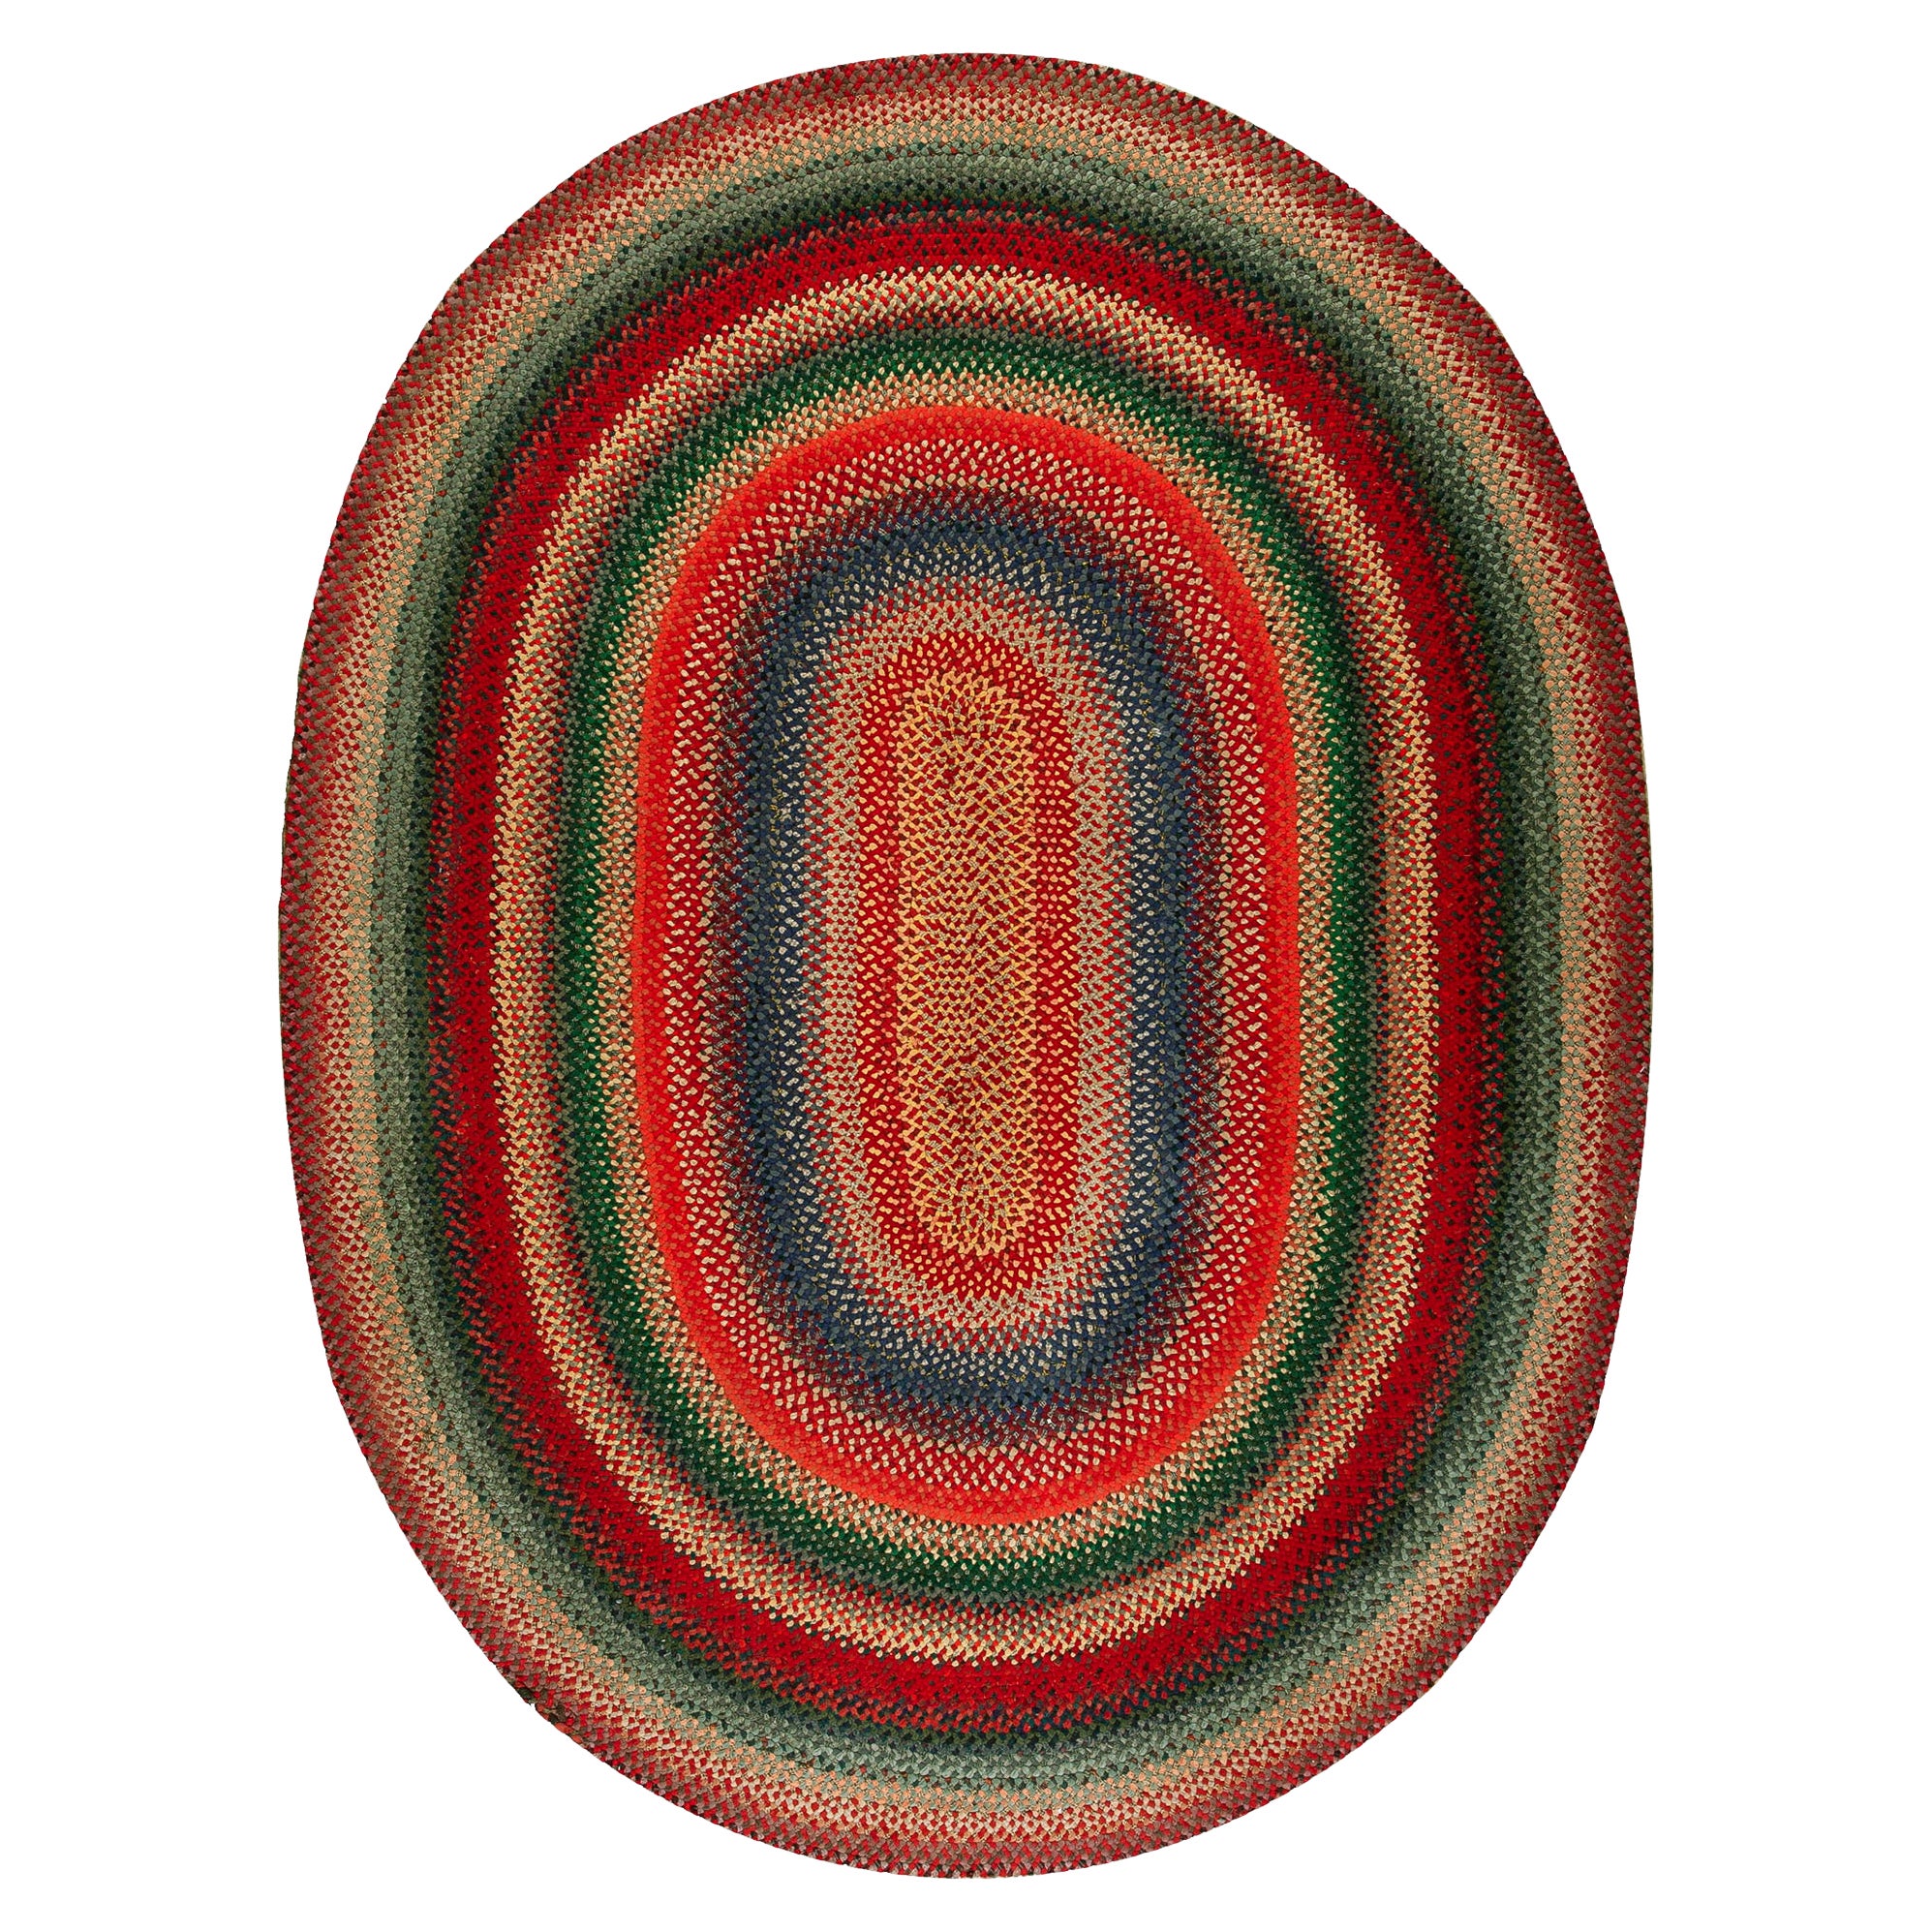 Early 20th Century Oval American Braided Rug ( 6'10"x 9'2" - 208 x 280 cm ) For Sale